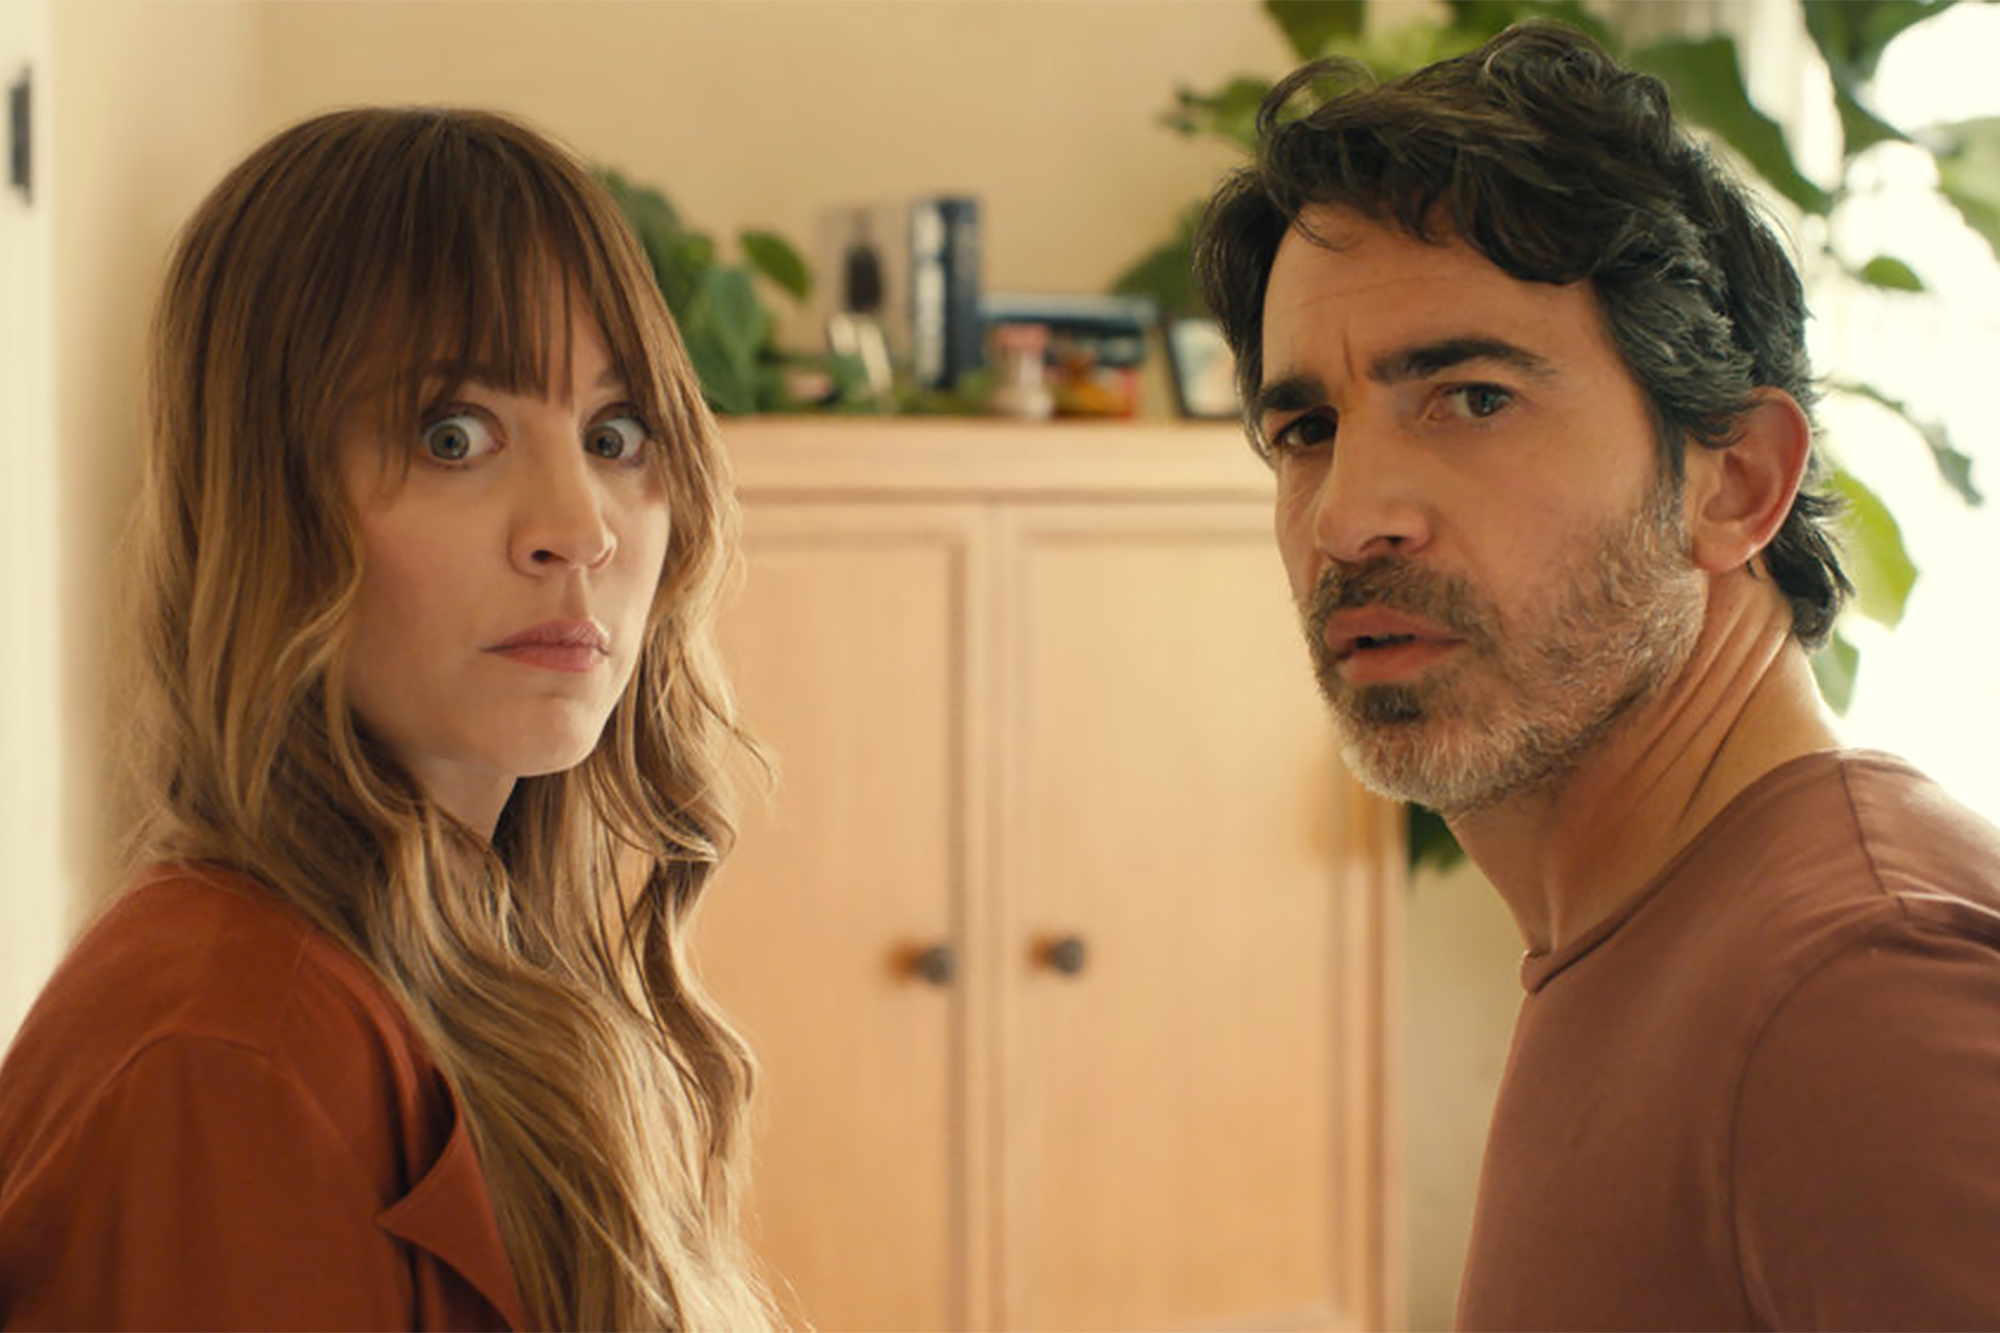 BASED ON A TRUE STORY -- "The Great American Art Form" Episode 101 -- Pictured: (l-r) Kaley Cuoco as Ava, Chris Messina as Nathan -- (Photo by: PEACOCK)